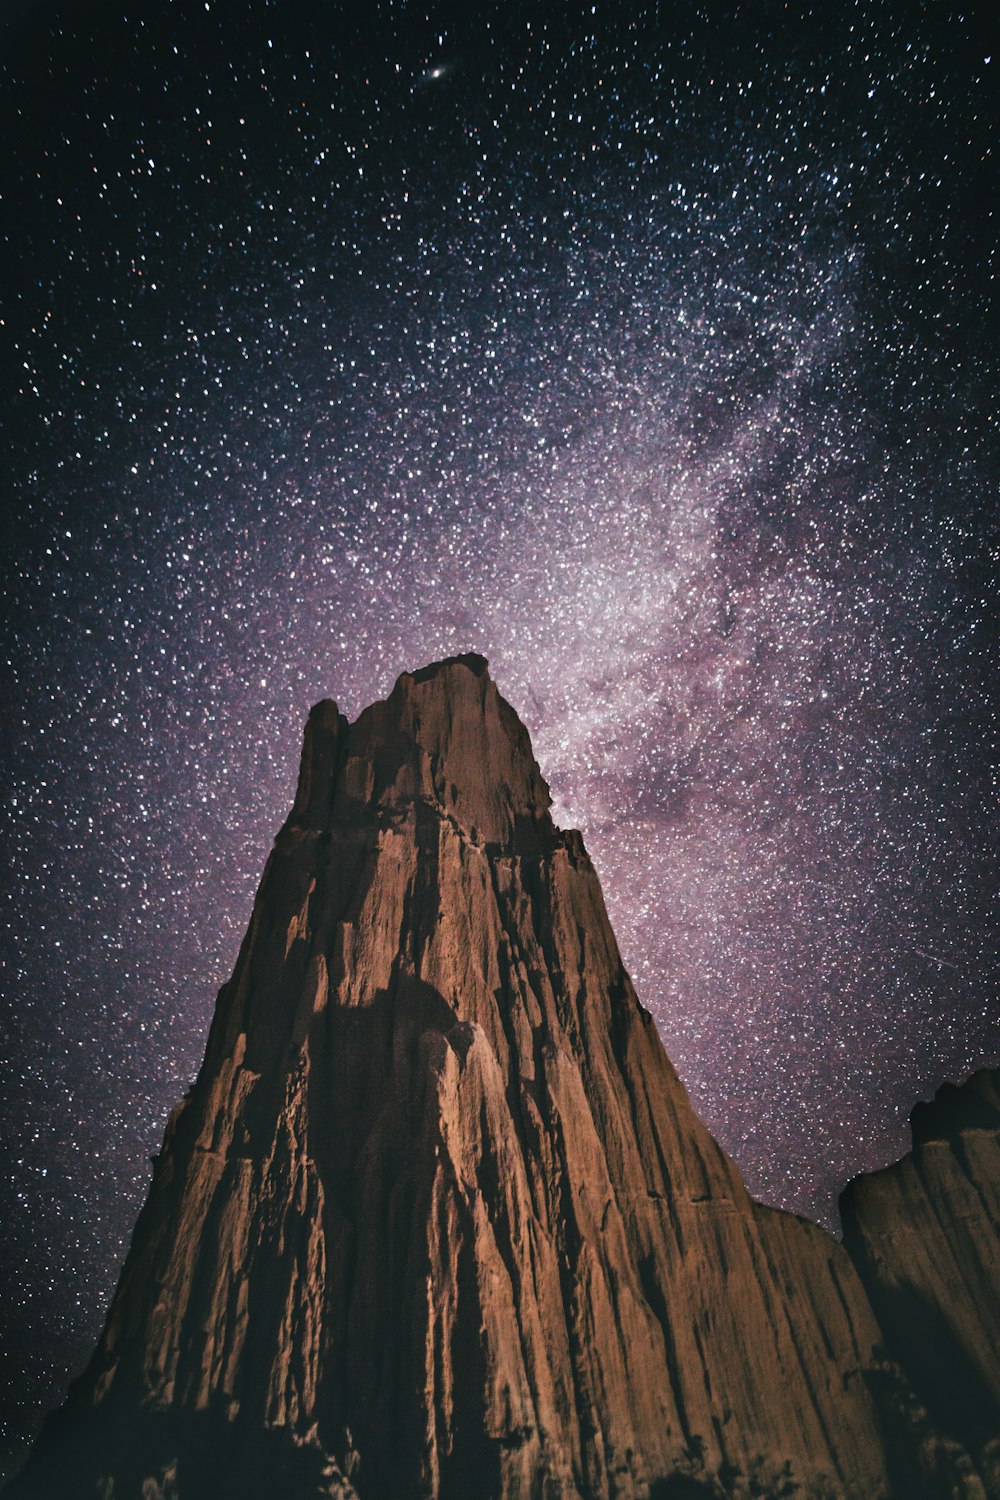 the night sky is filled with stars above a mountain